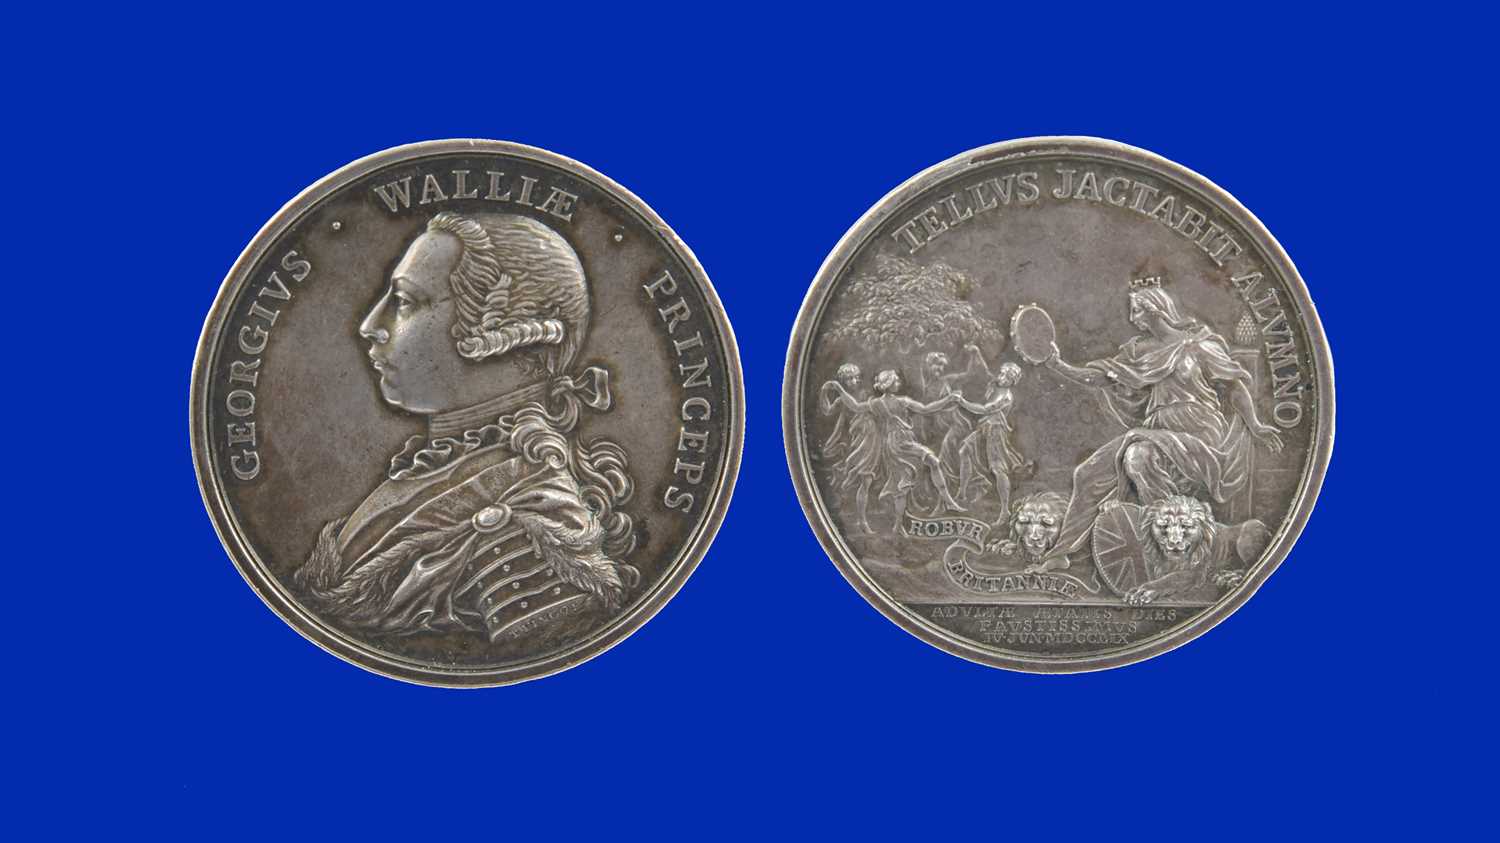 George II, Majority of the Prince of Wales 1759, a silver medal by Thomas Pingo, armoured bust of